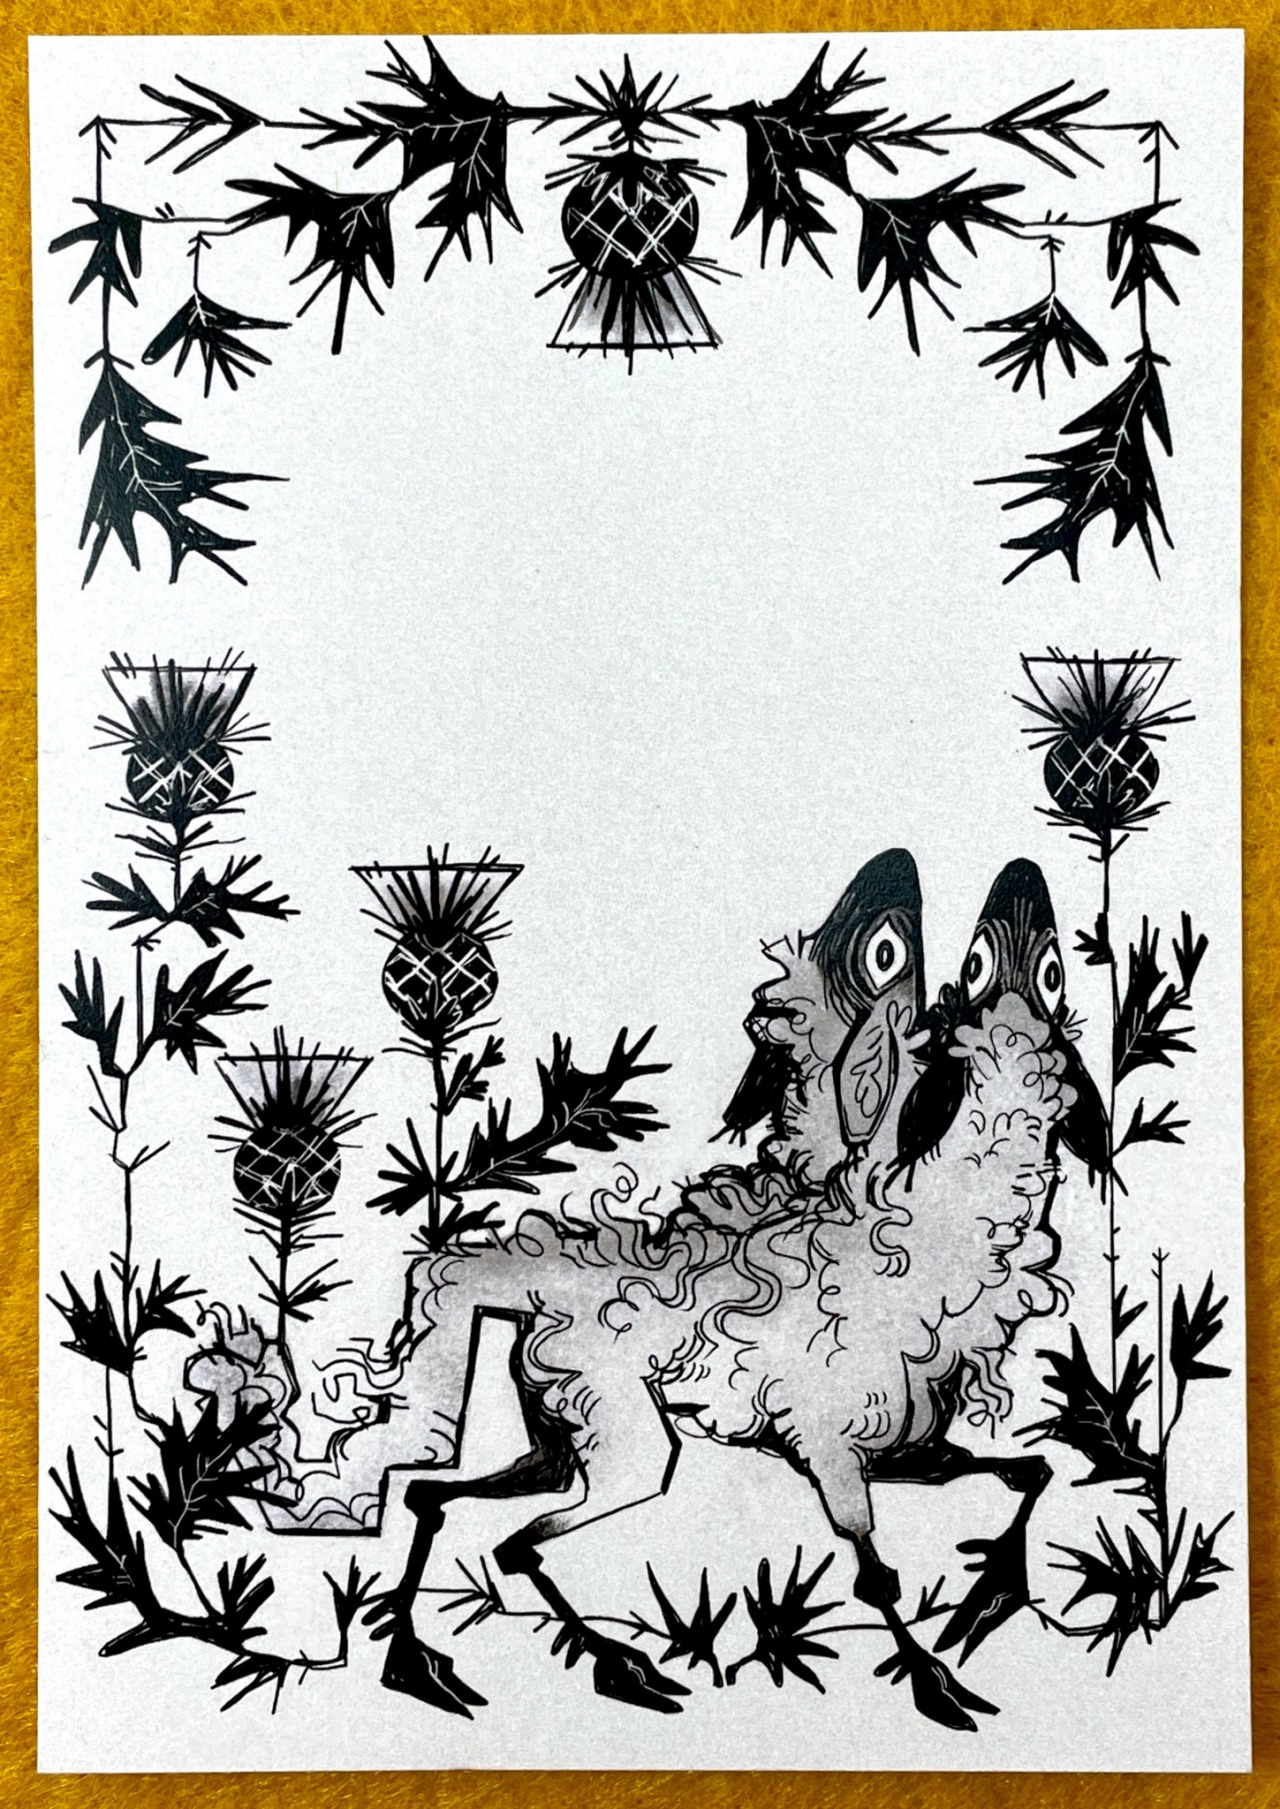 A print in black and white featuring an illustration of a two-headed lamb, mid-stride. Its heads are raised to look upwards, eyes full of awe. Thistle frames the borders of the print, leaving negative space in the centre.